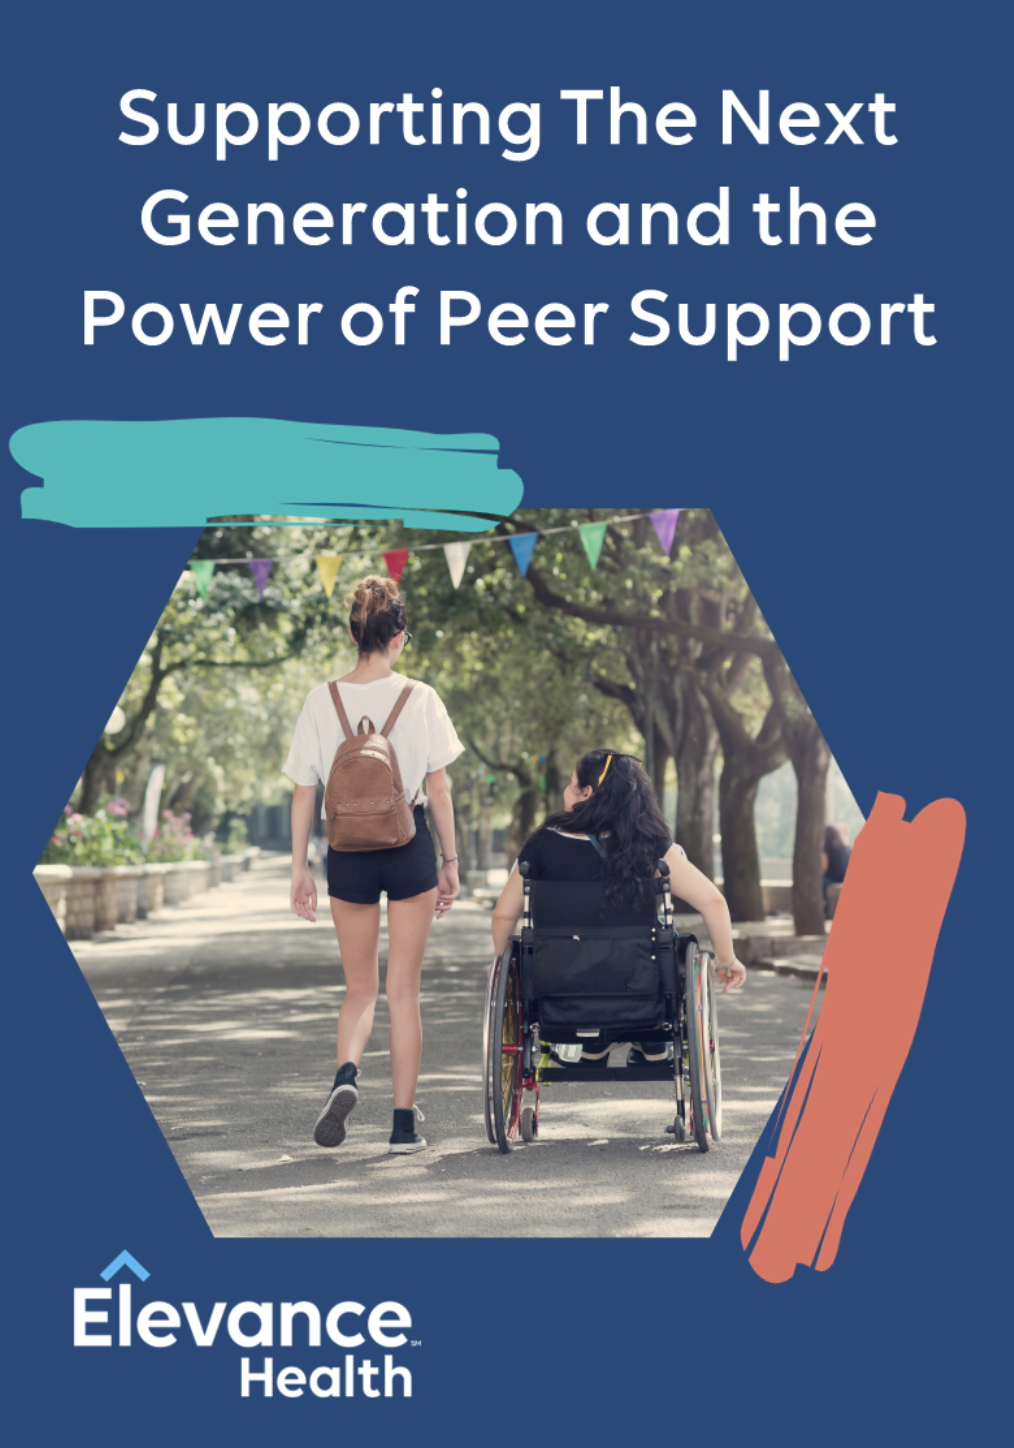 Elevance Health Sponsor information. A dark blue background showing an image of a two people from the back. One is walking and wearing a backpack and the other is in a wheelchair. Above them it says "Supporting the next generation and the power of peer support".